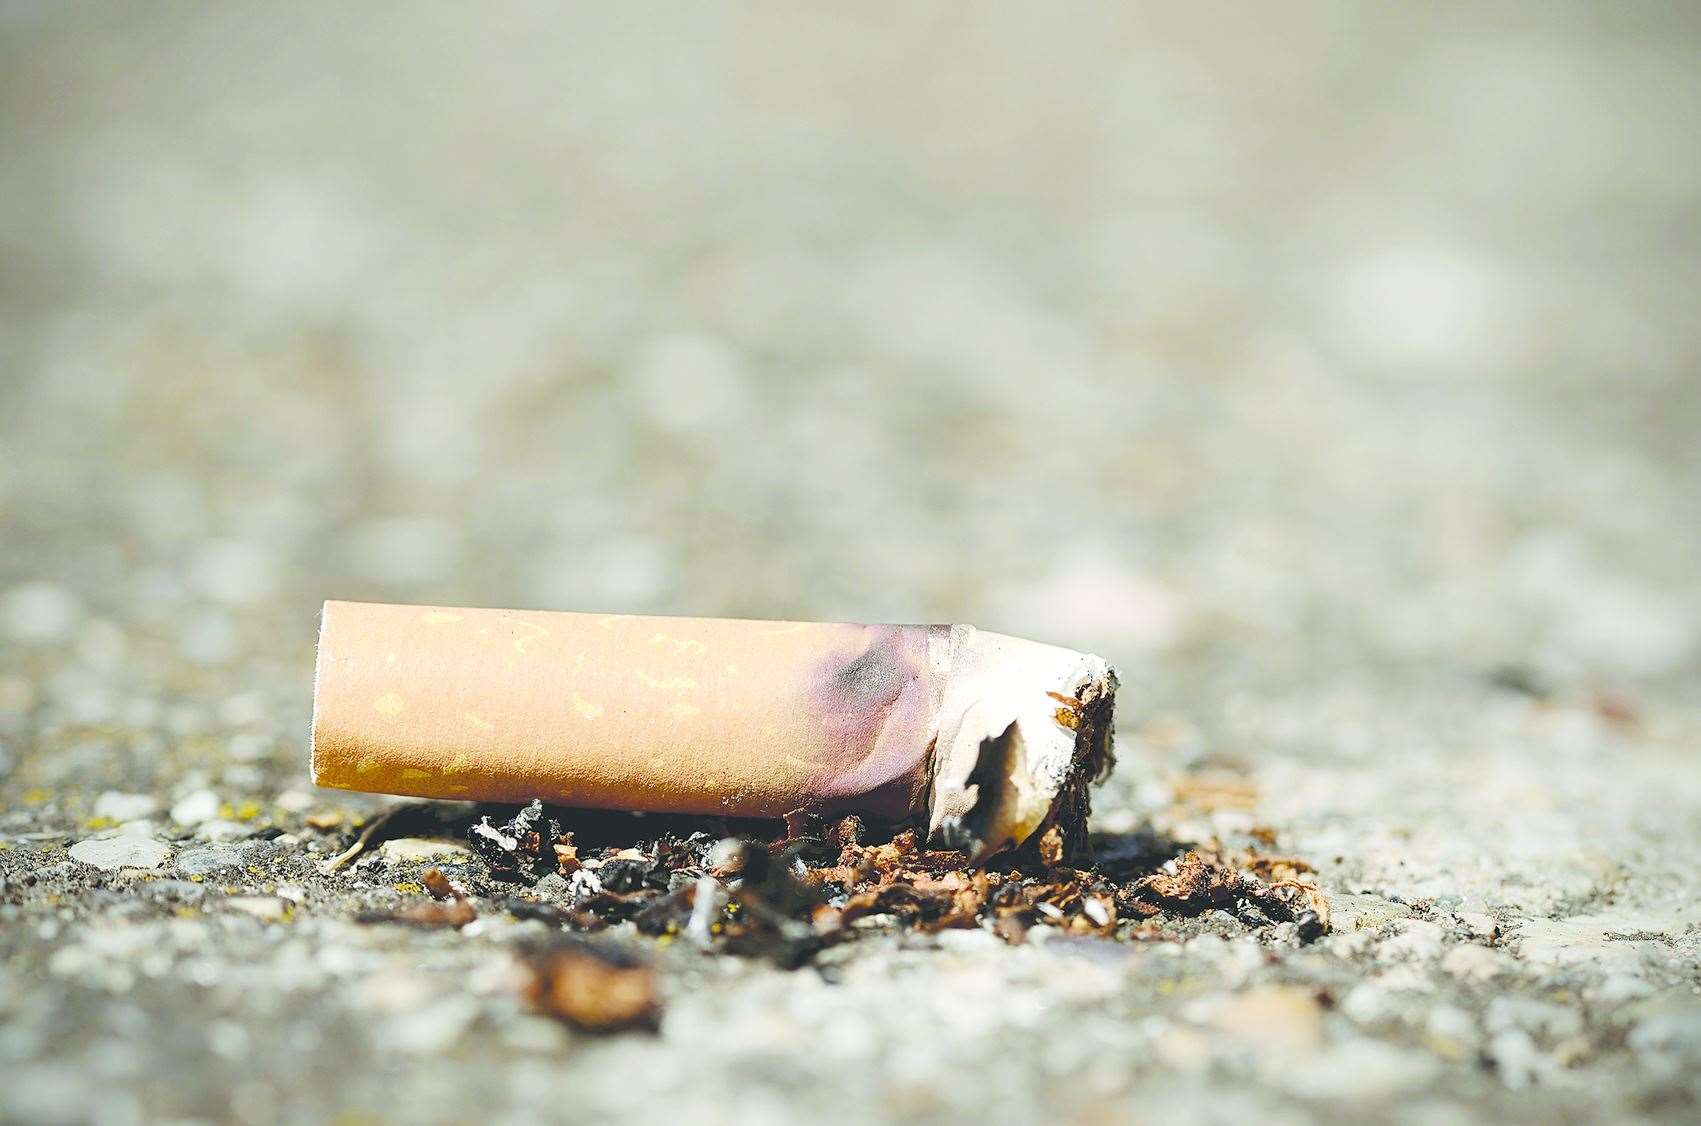 The prosecution was over a dropped cigarette. Library picture